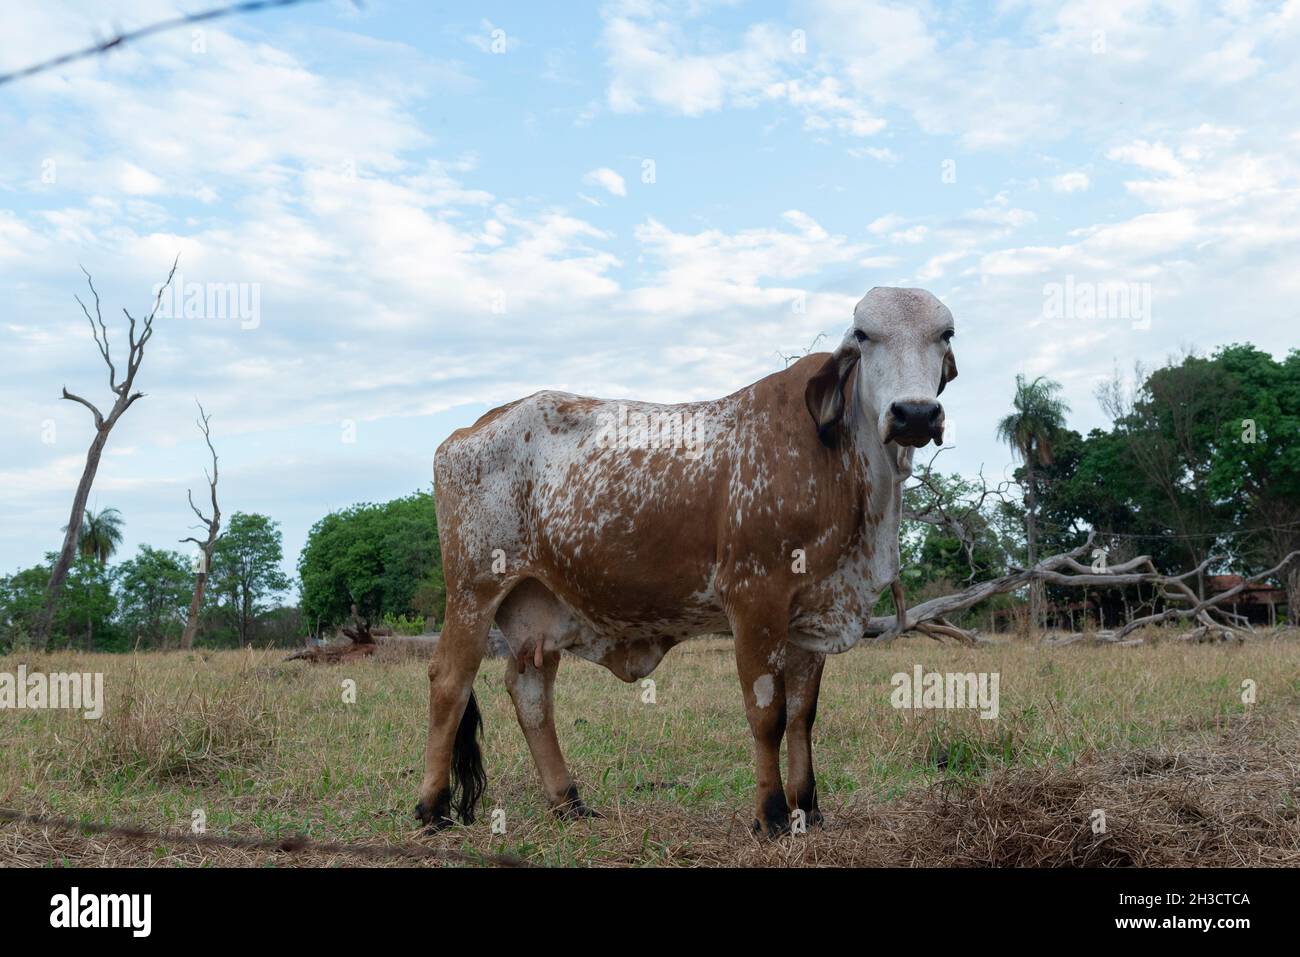 Gir cow in a beautiful brachiaria pasture in the countryside of Brazil. Brazil is one of the biggest cattle raisers in the world, exporting meat and m Stock Photo